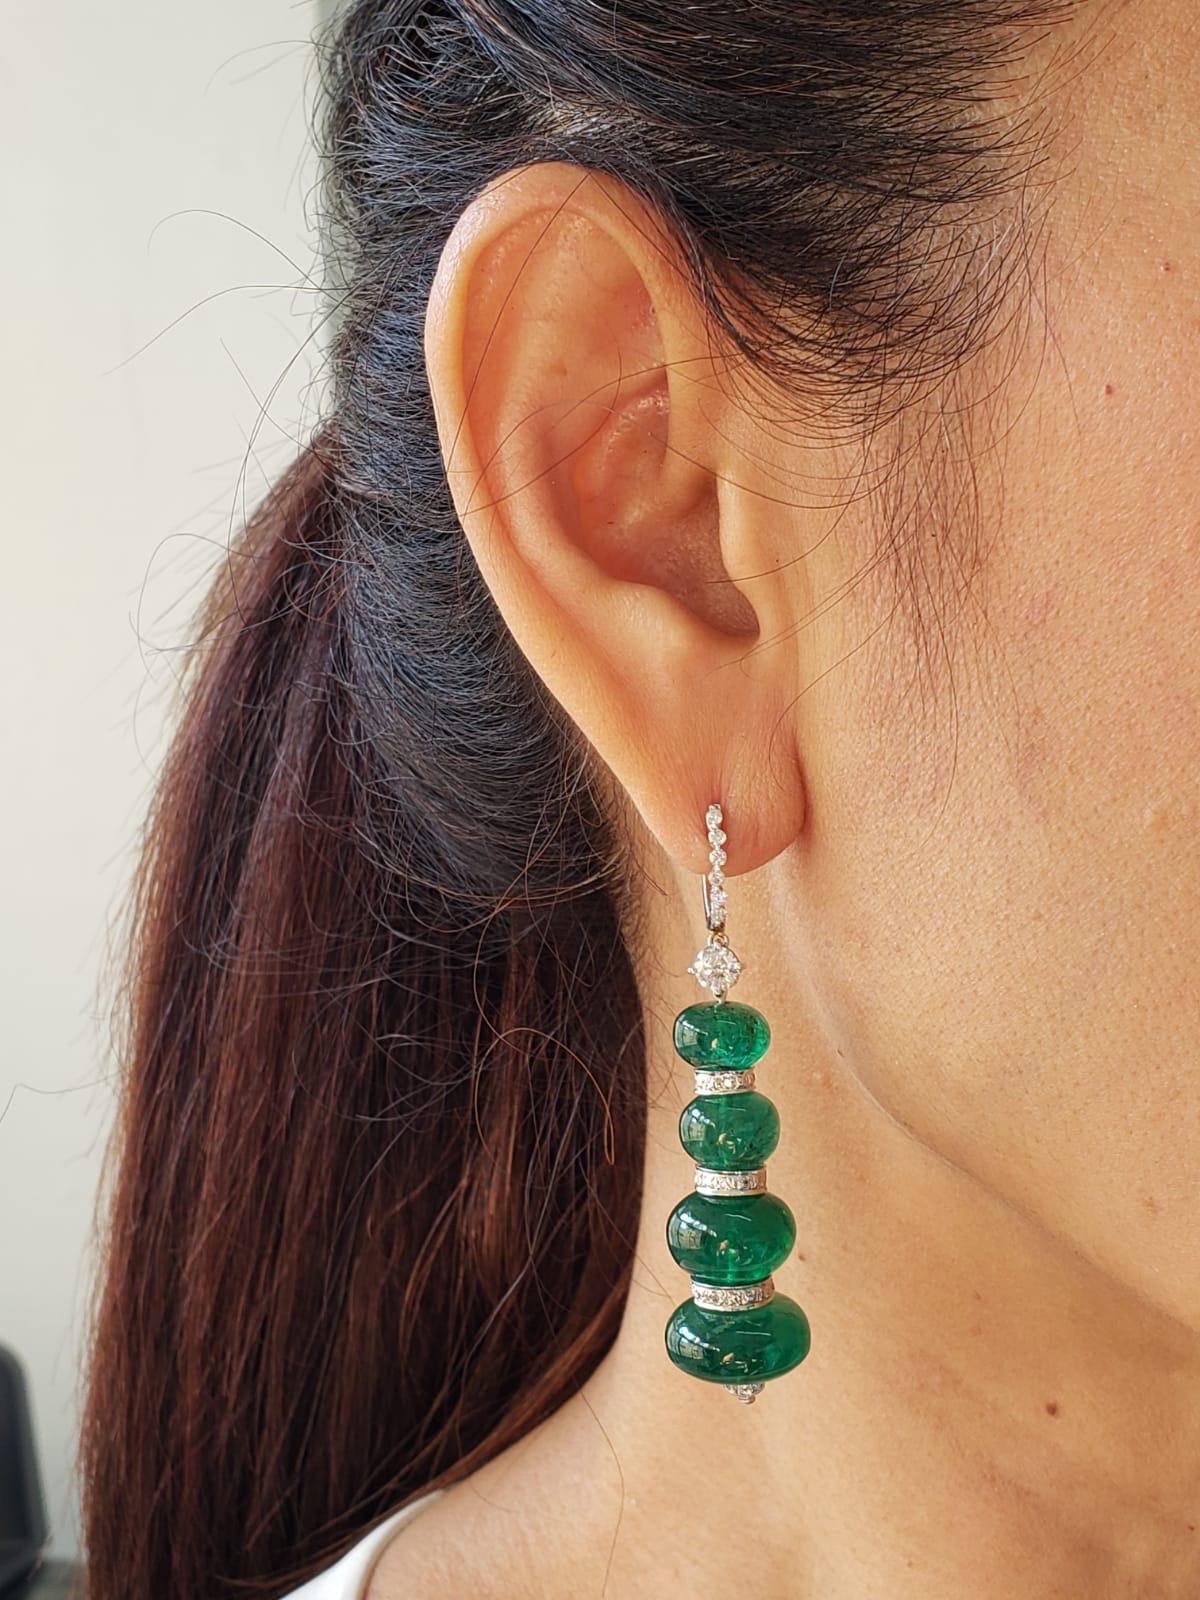 A pair of 58.72 carat Zambian Emerald beads earrings, transparent with few natural inclusions. These are a classic piece, with a modern touch - the quality of the emeralds speaks for itself! The emerald beads are absoluately natural, with no